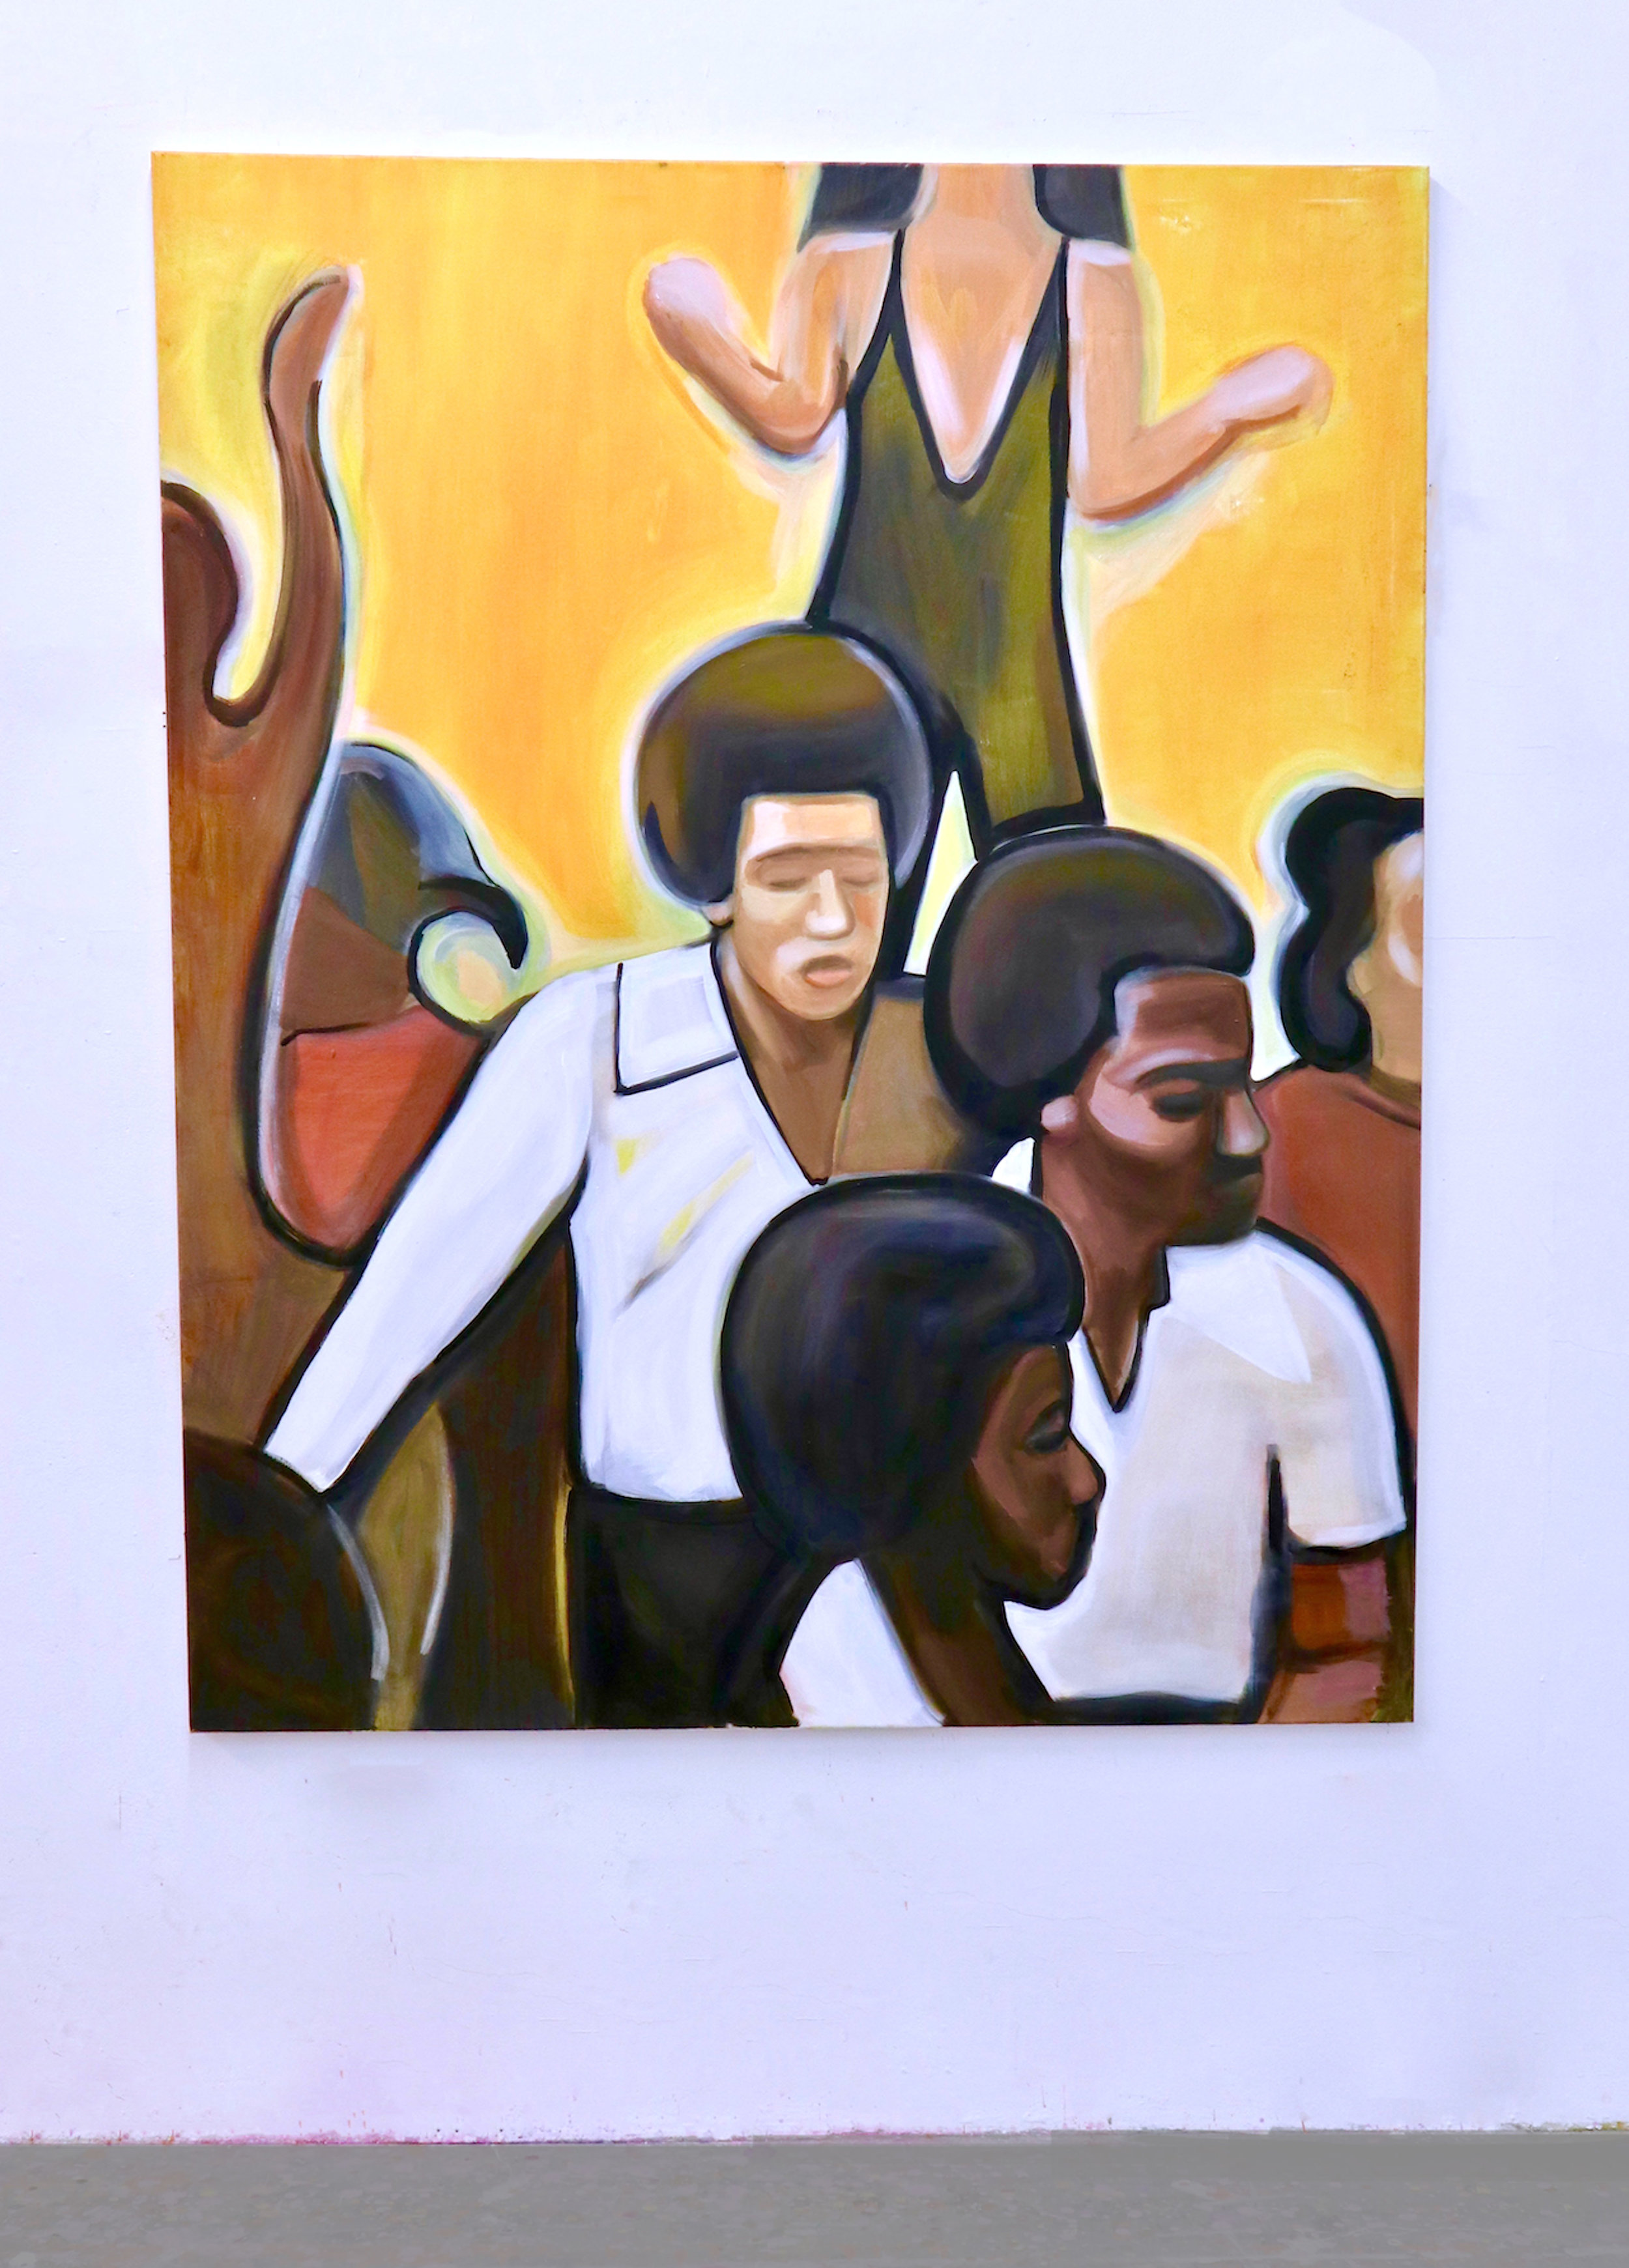   Soul Train (Take that to the bank) , 2019 Oil on canvas 60 x 48  inches 152.4 x 122 cm 